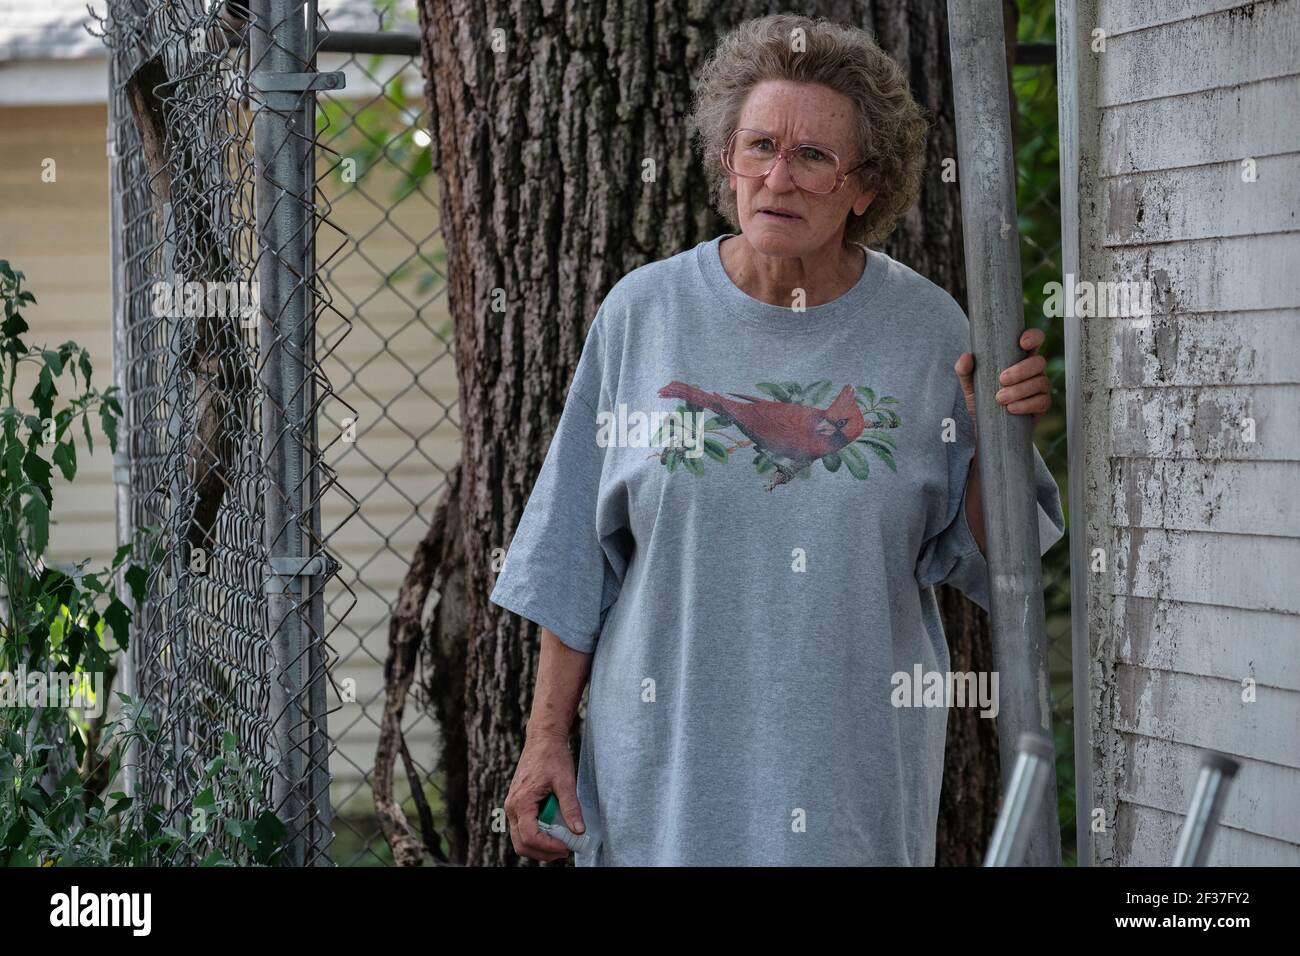 Hillbilly Elegy (2020) directed by Ron Howard and starring Glenn Close as an eccentric grandmother named Mamaw. Stock Photo